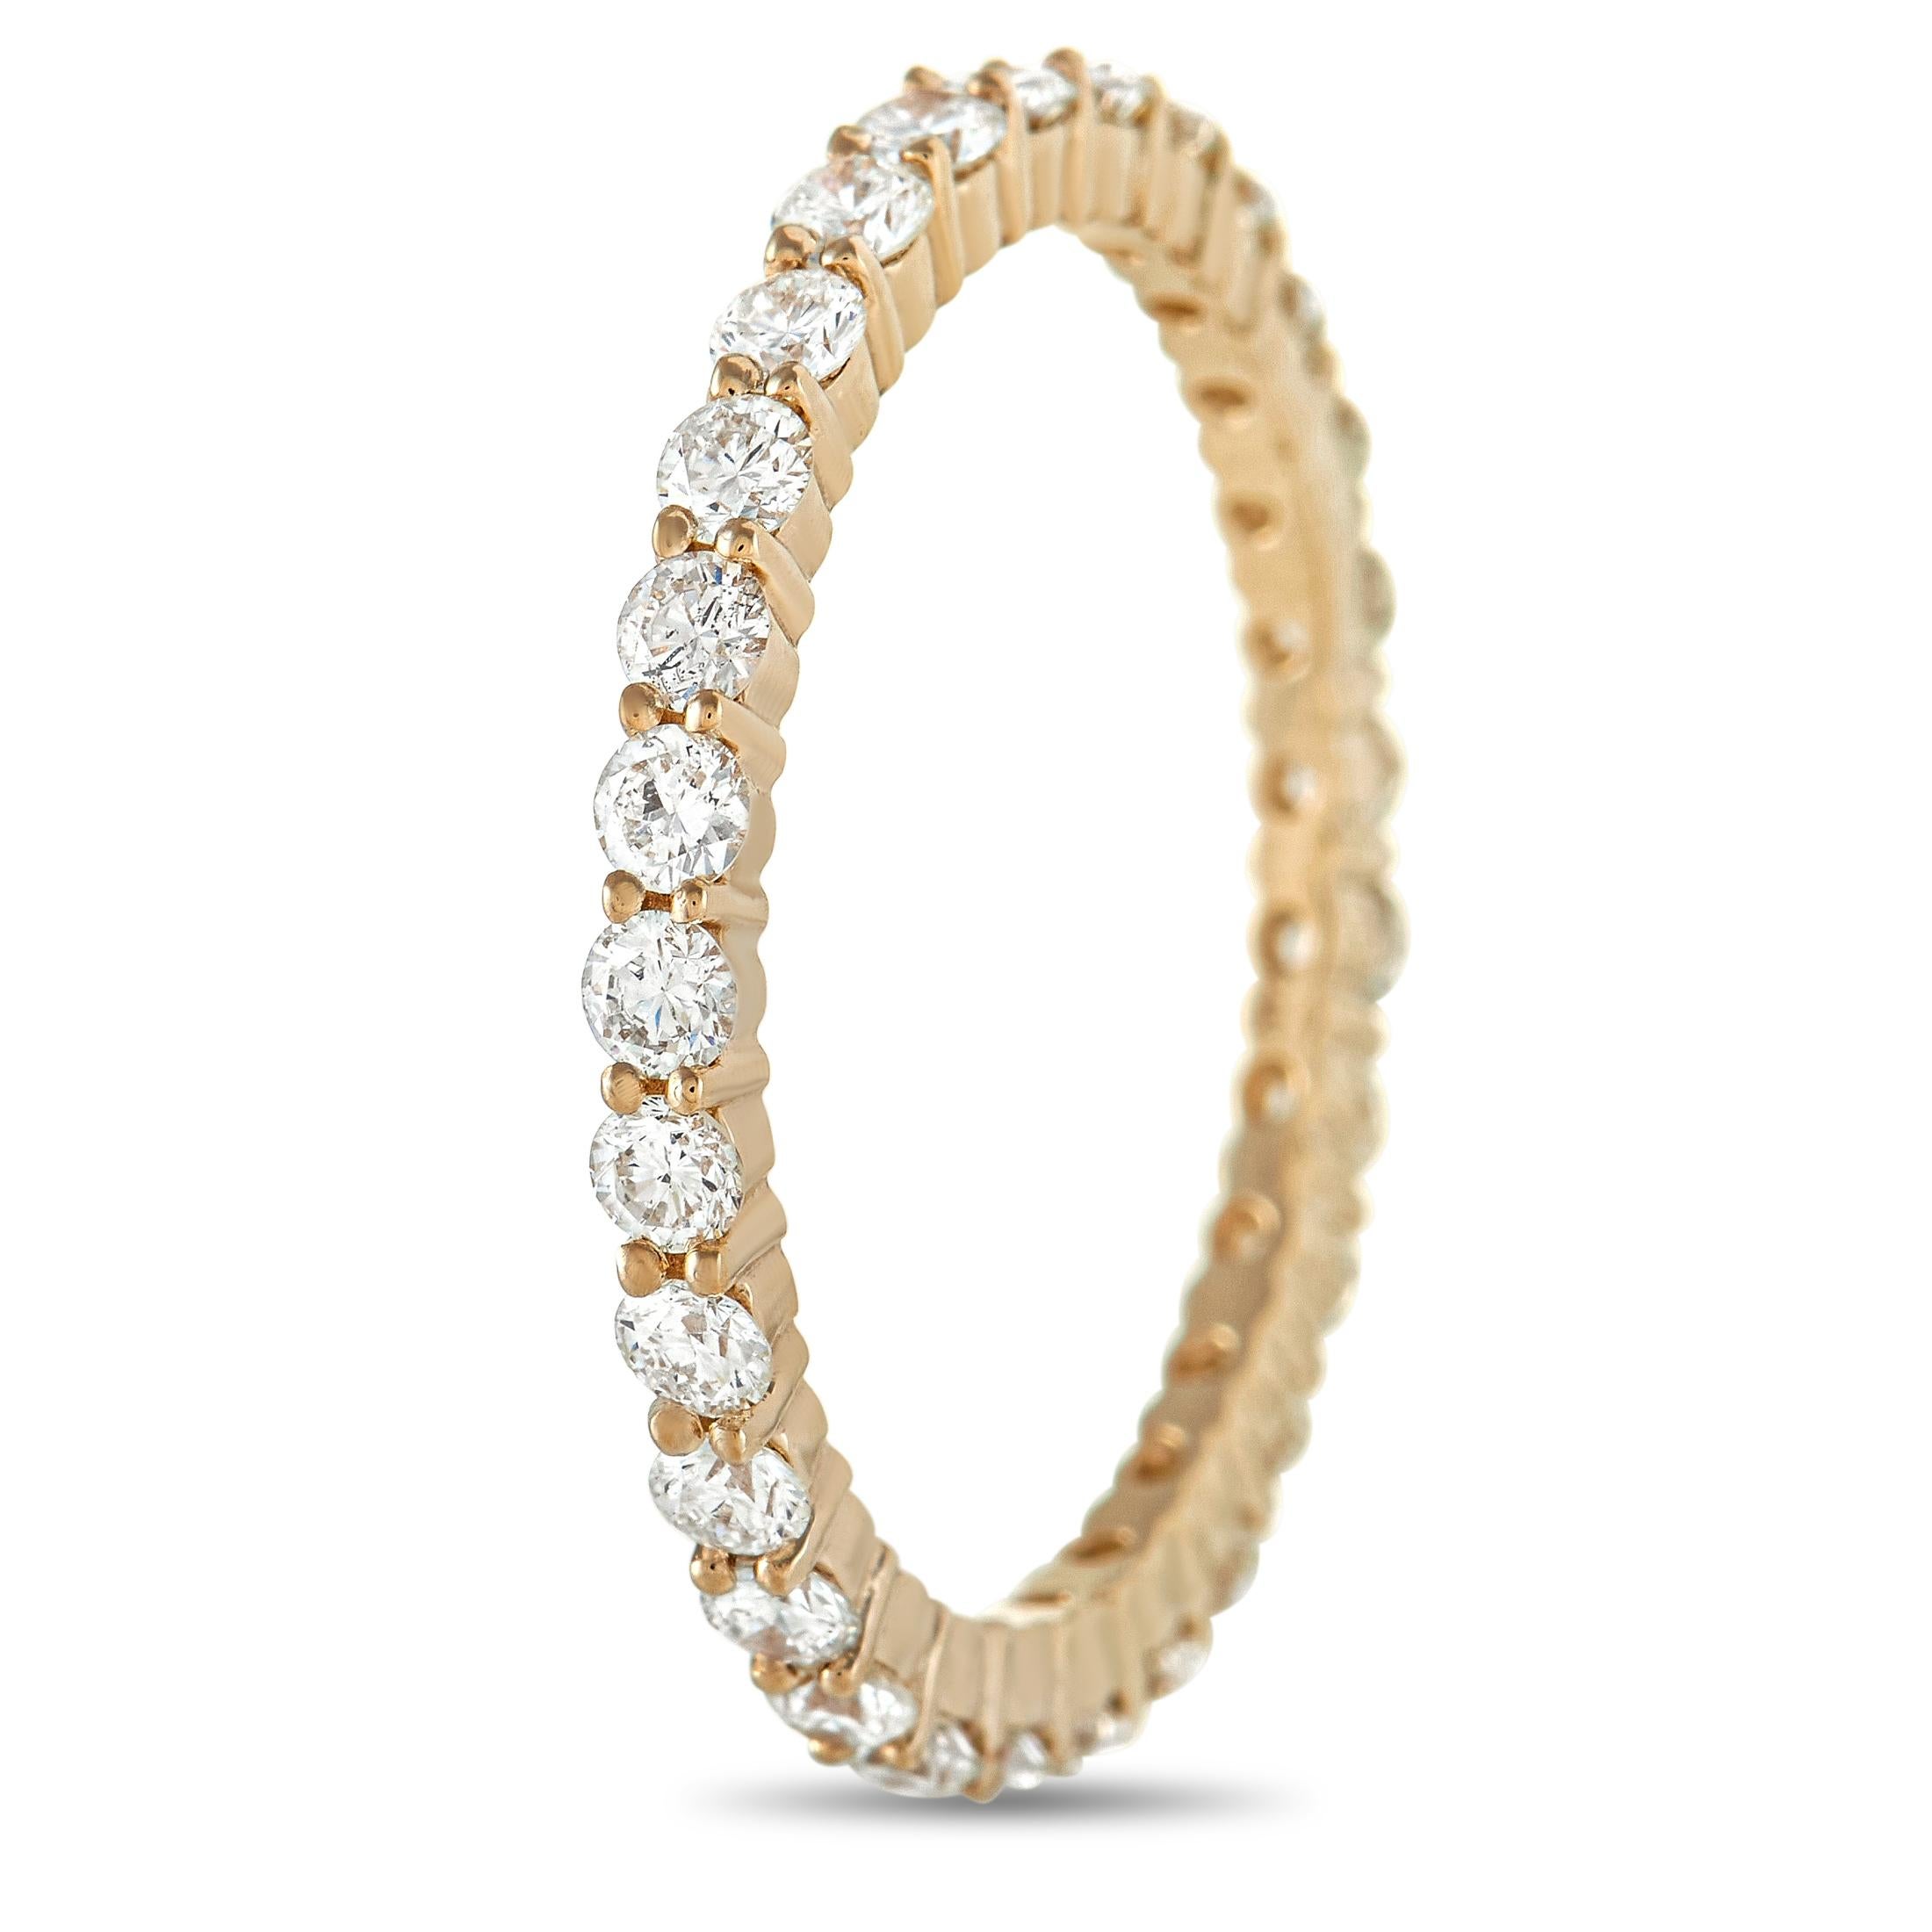 This stunning LB Exclusive 14K Yellow Gold 1.00 ct Diamond Infinity Ring is made with 14K yellow gold and set with a single row of round-cut diamonds totaling 1.00 carats around the band. The ring has a total weight of 1.5 grams. 
 
 This ring is